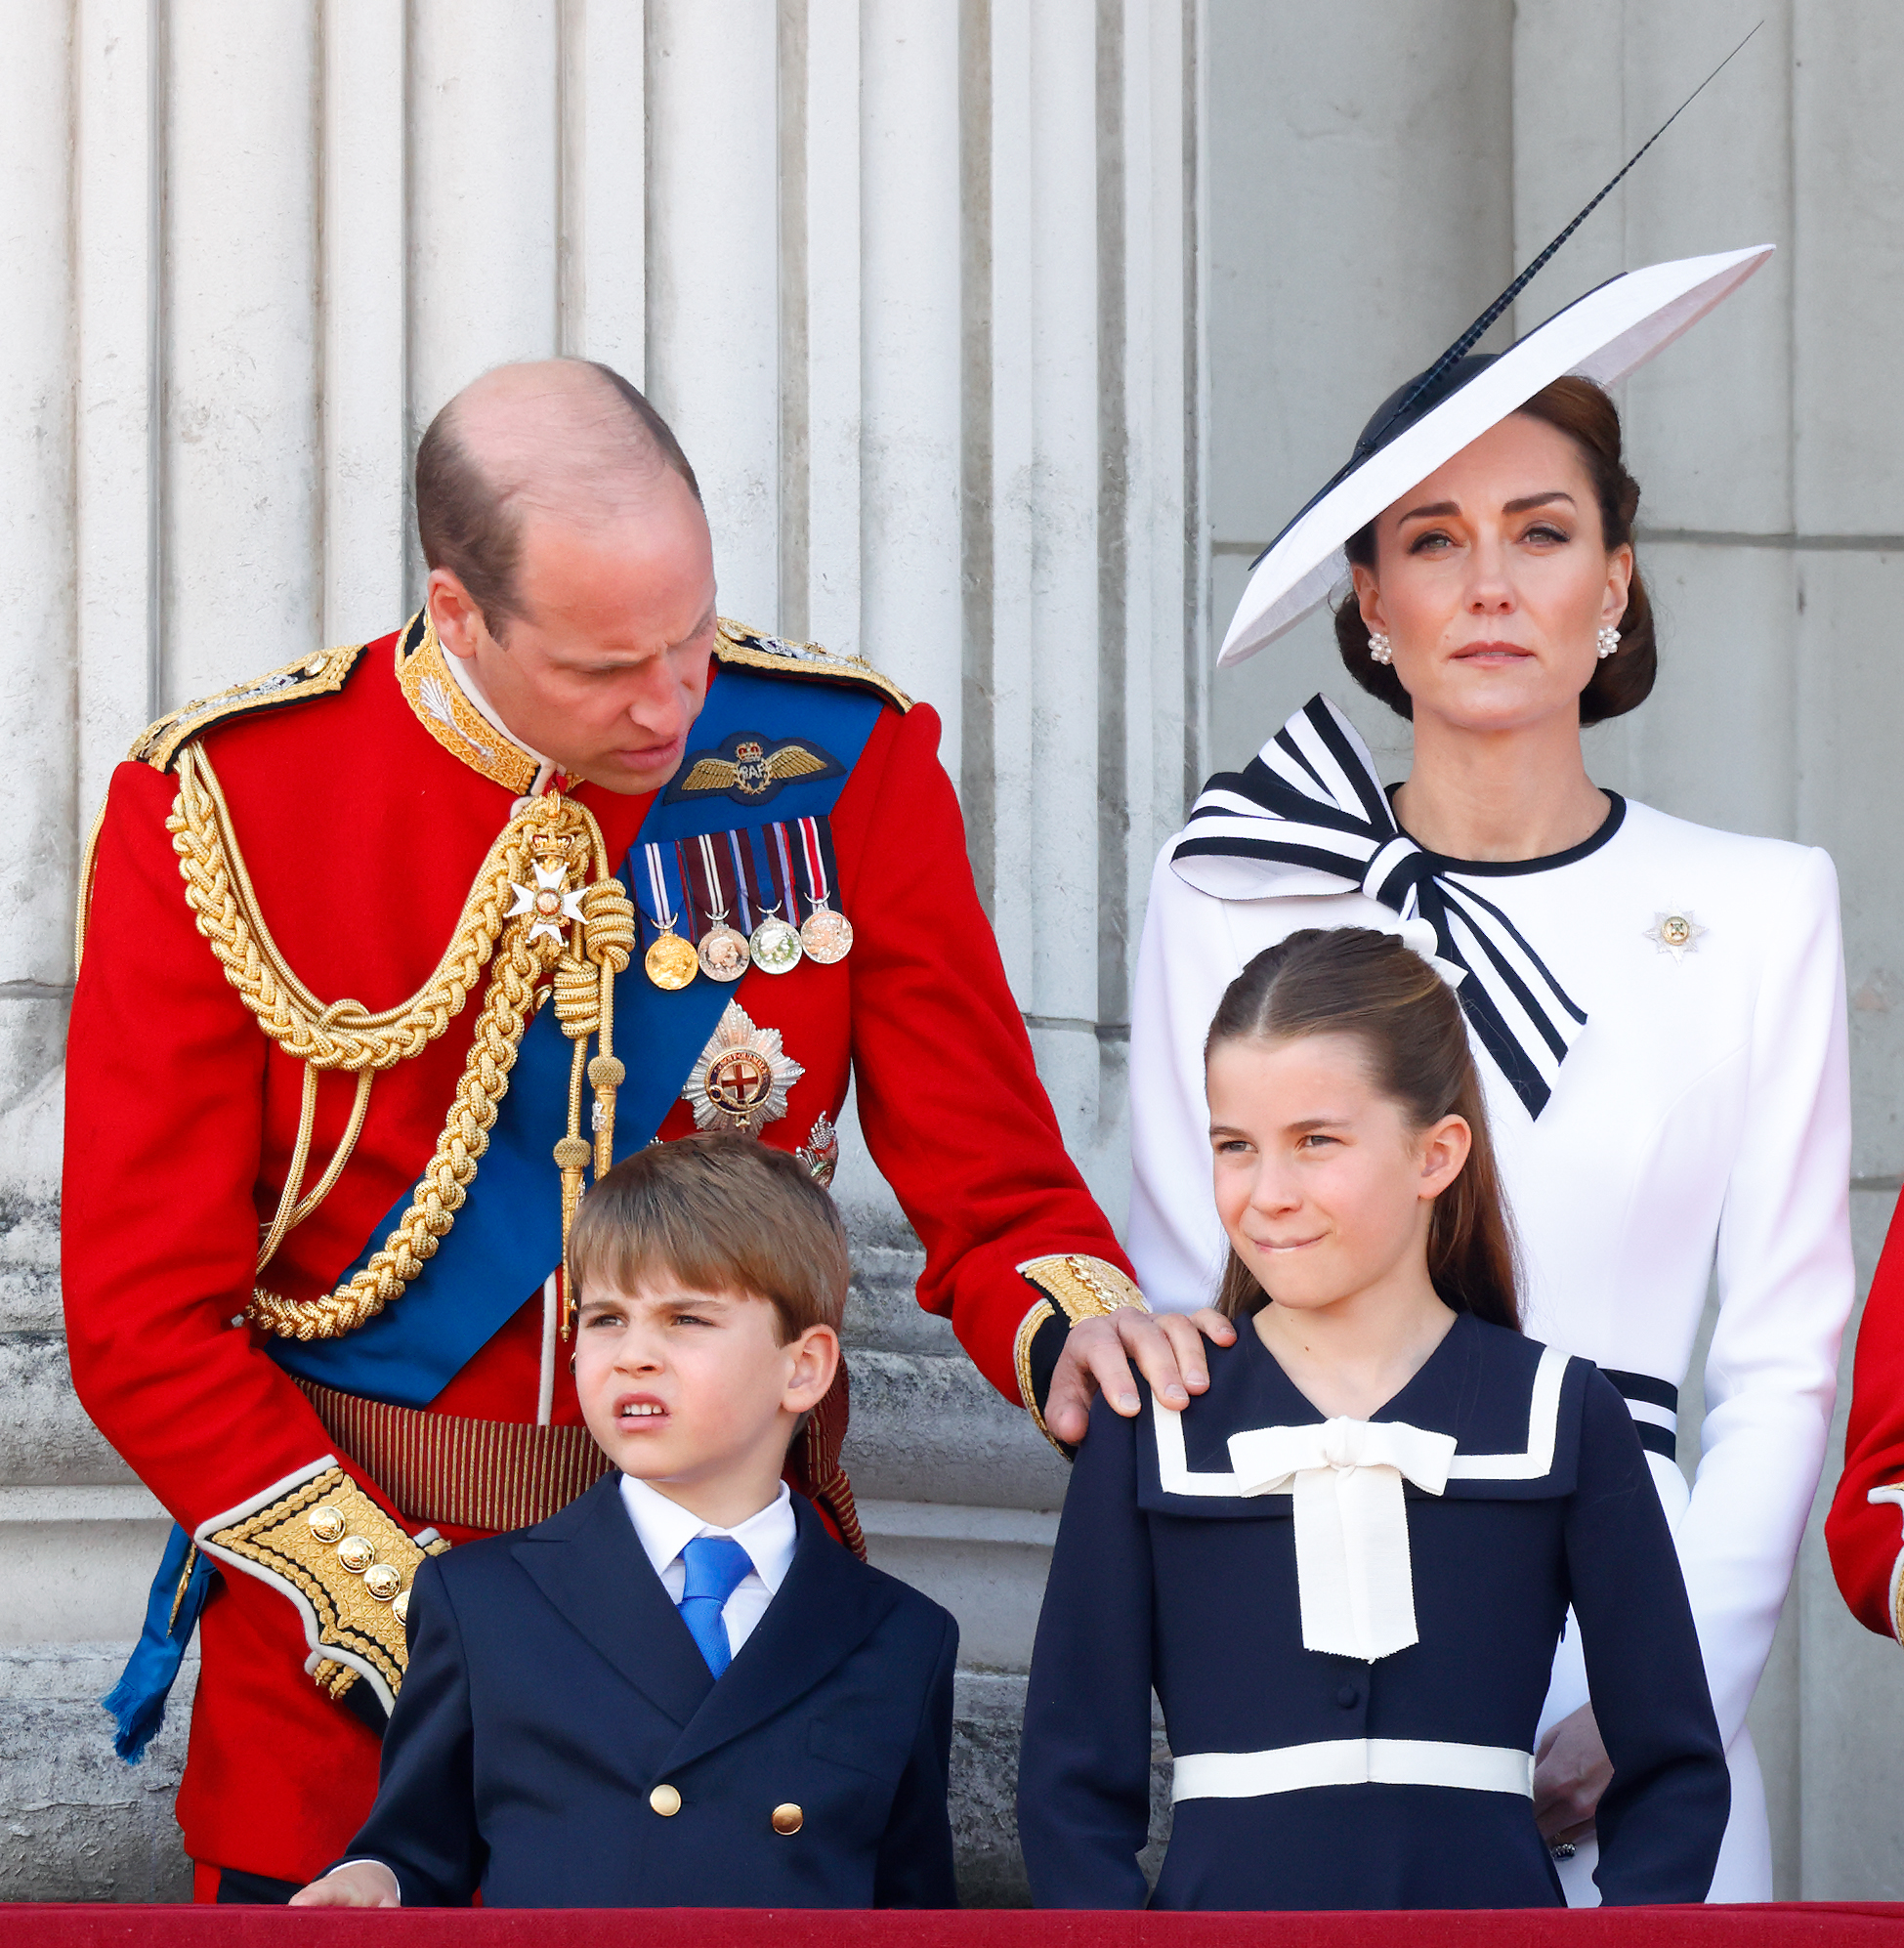 Prince William, Prince of Wales, Prince Louis of Wales, Princess Charlotte of Wales, and Catherine, Princess of Wales on the balcony of Buckingham Palace attending Trooping the Colour in London, England, on June 15, 2024. | Source: Getty Images